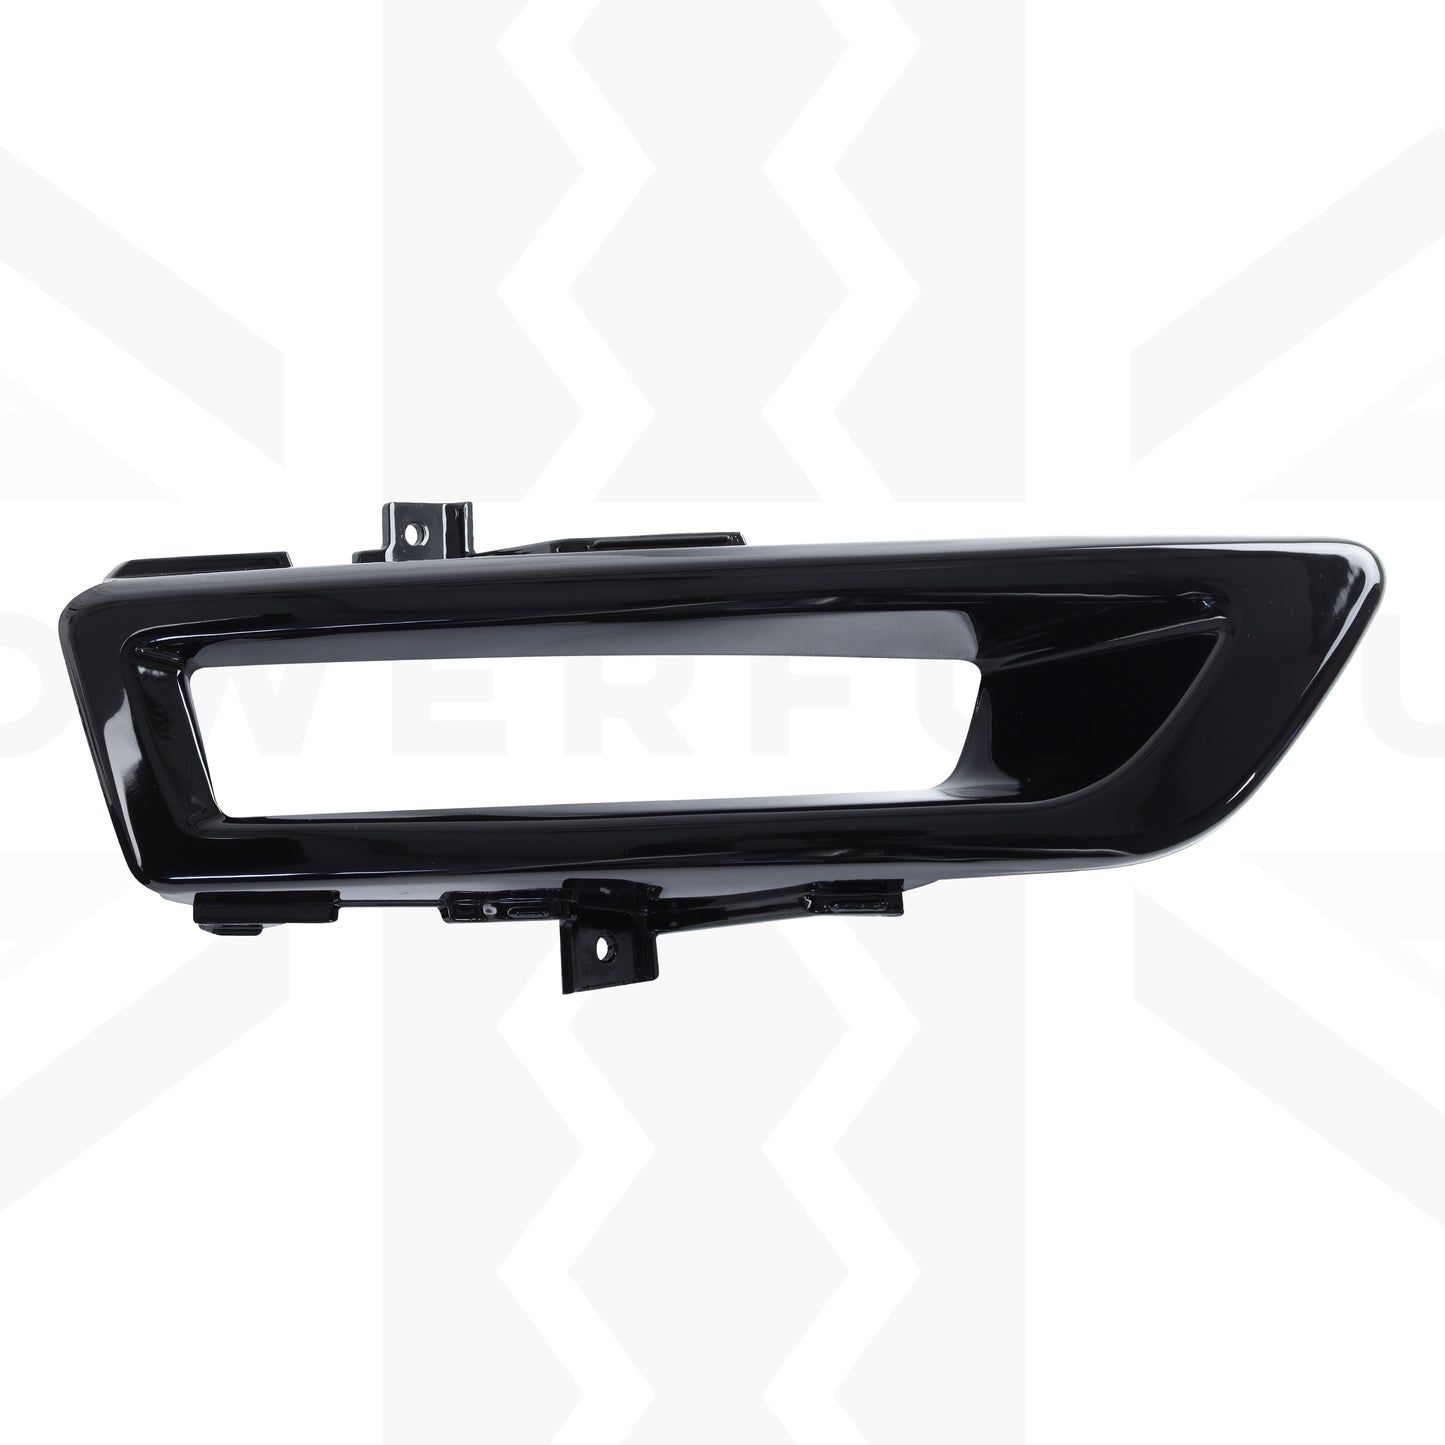 Gloss Black Fog Light Surround for Land Rover Discovery Sport 2015-19 - Pair